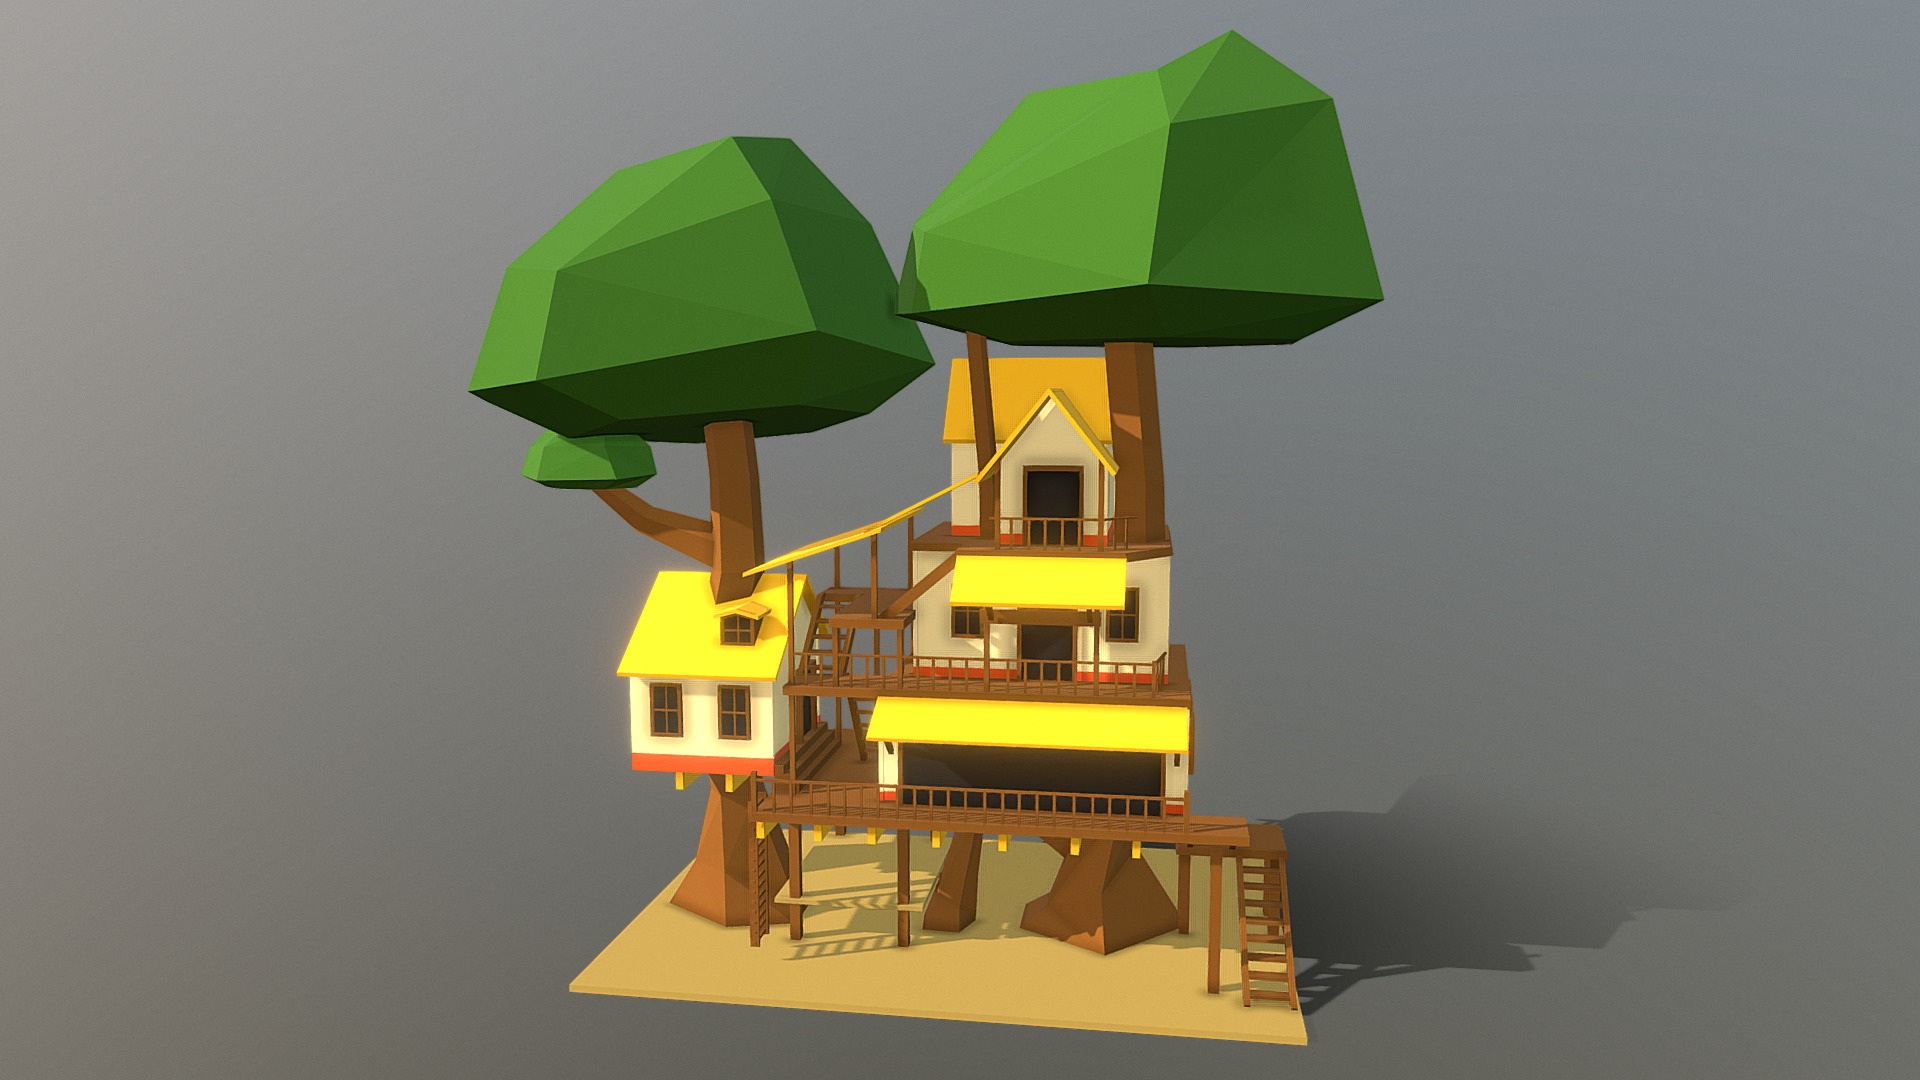 3D model HIE Tree House N2 - This is a 3D model of the HIE Tree House N2. The 3D model is about a toy house with a green roof.